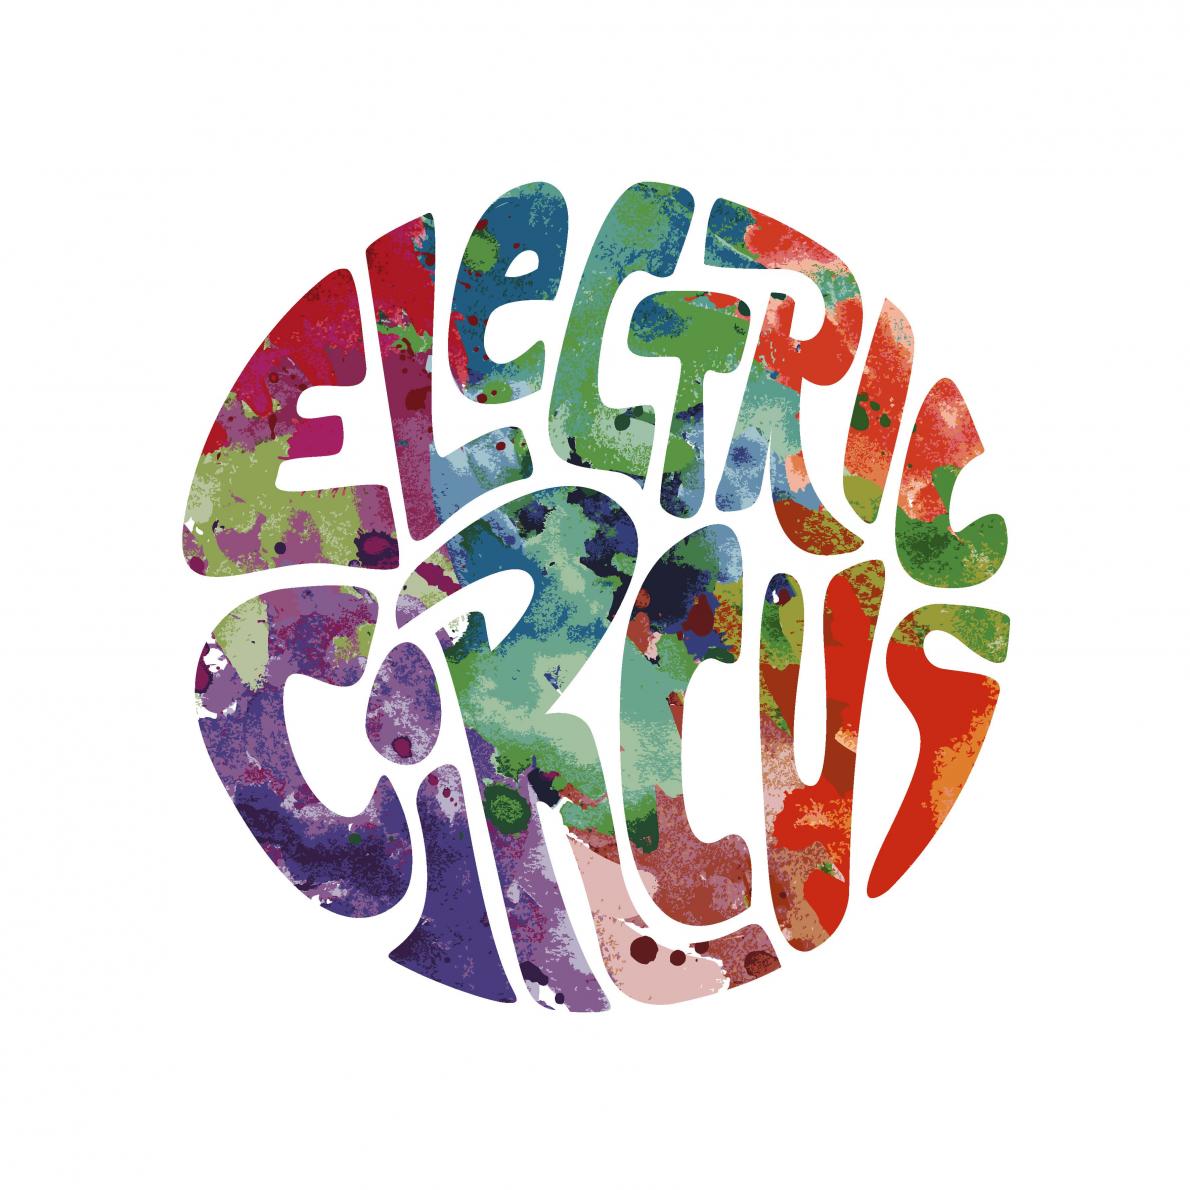 Circus Electrique download the new version for mac